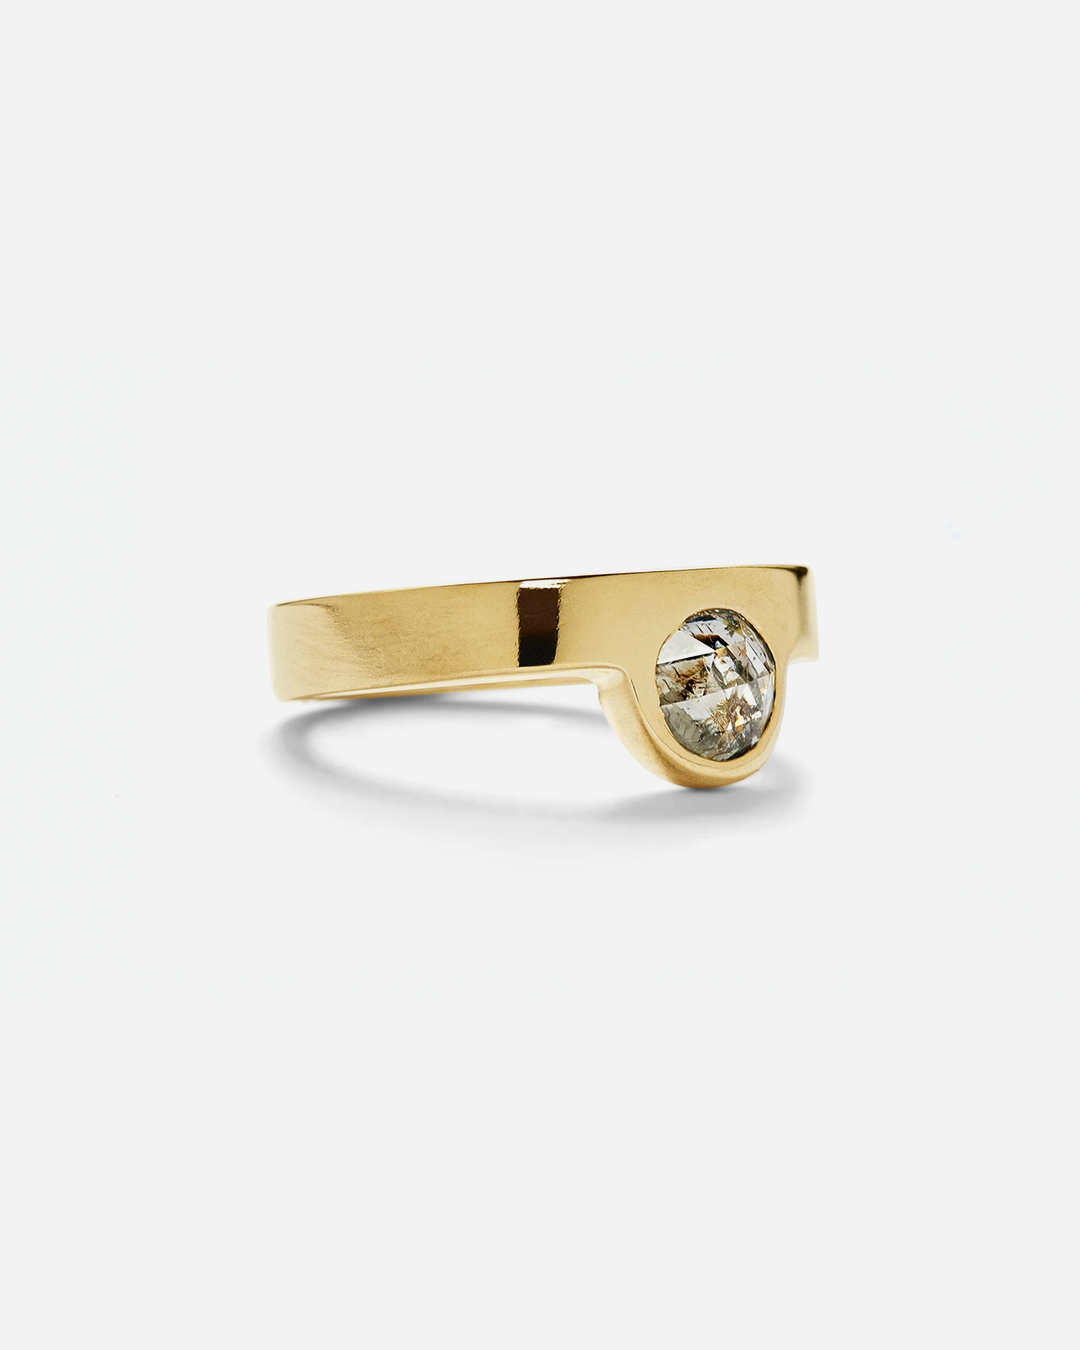 Odine / Rose Cut Diamond Ring By Casual Seance